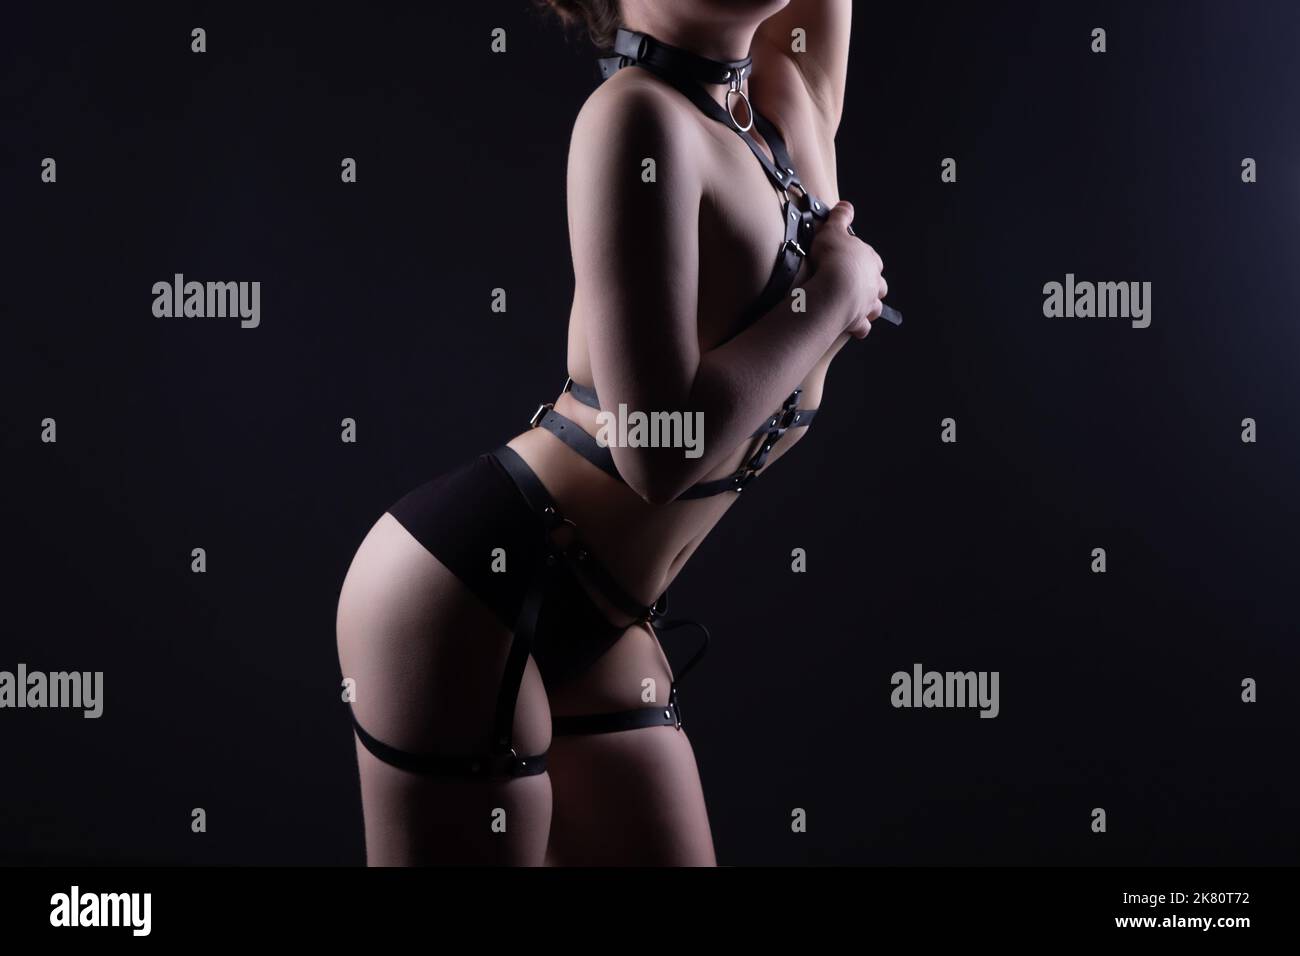 Image of woman covered breast in black bdsm belt Stock Photo